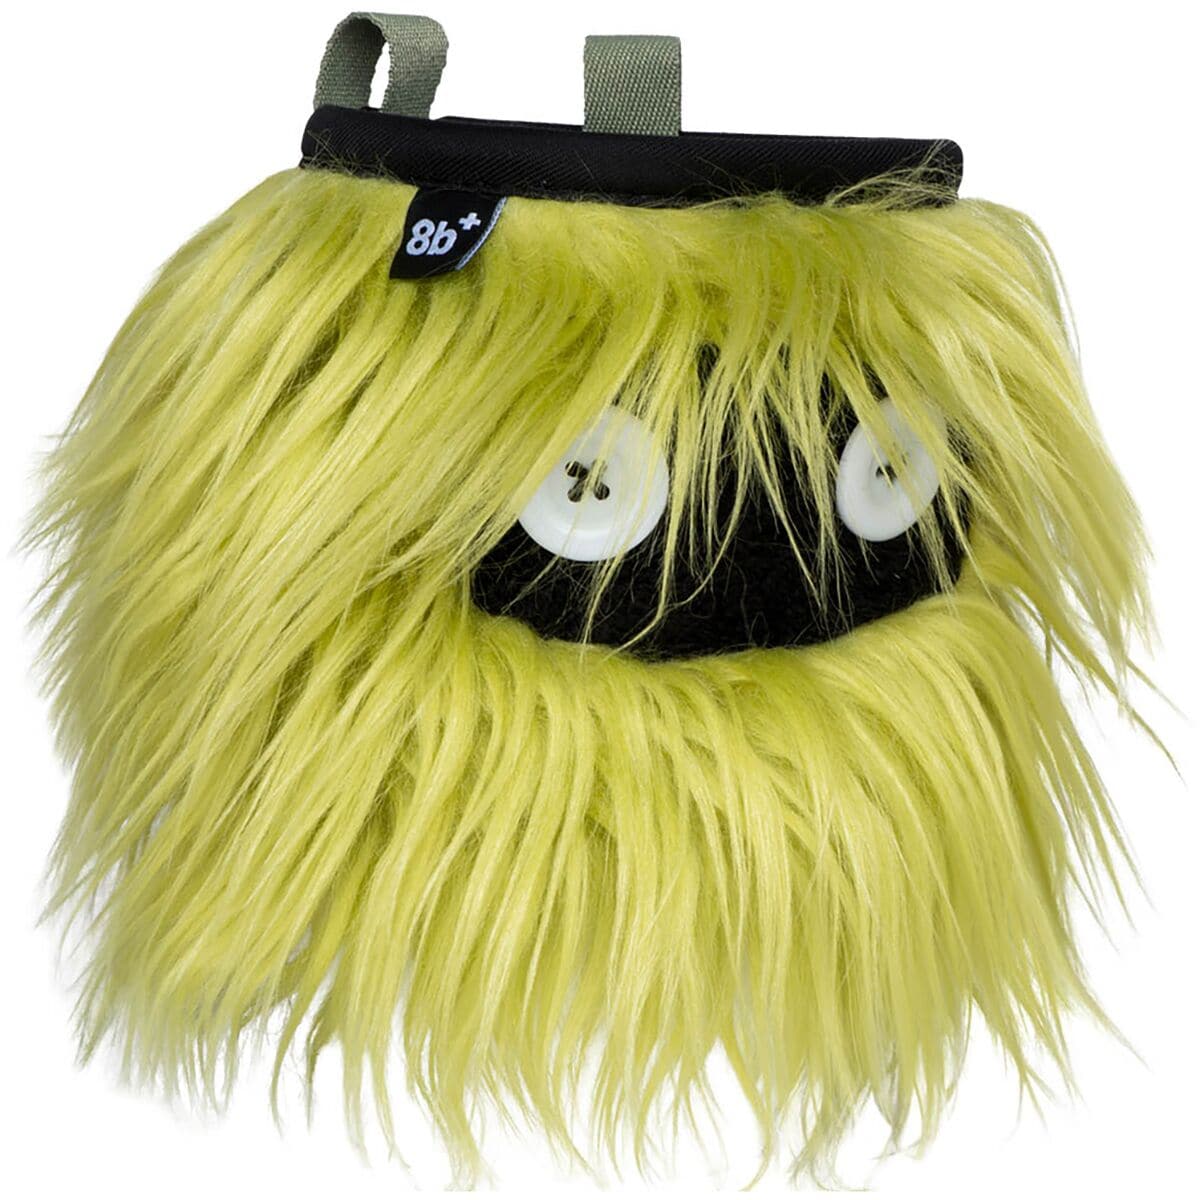 Furry Monsters Chalk Bag for rock climbing